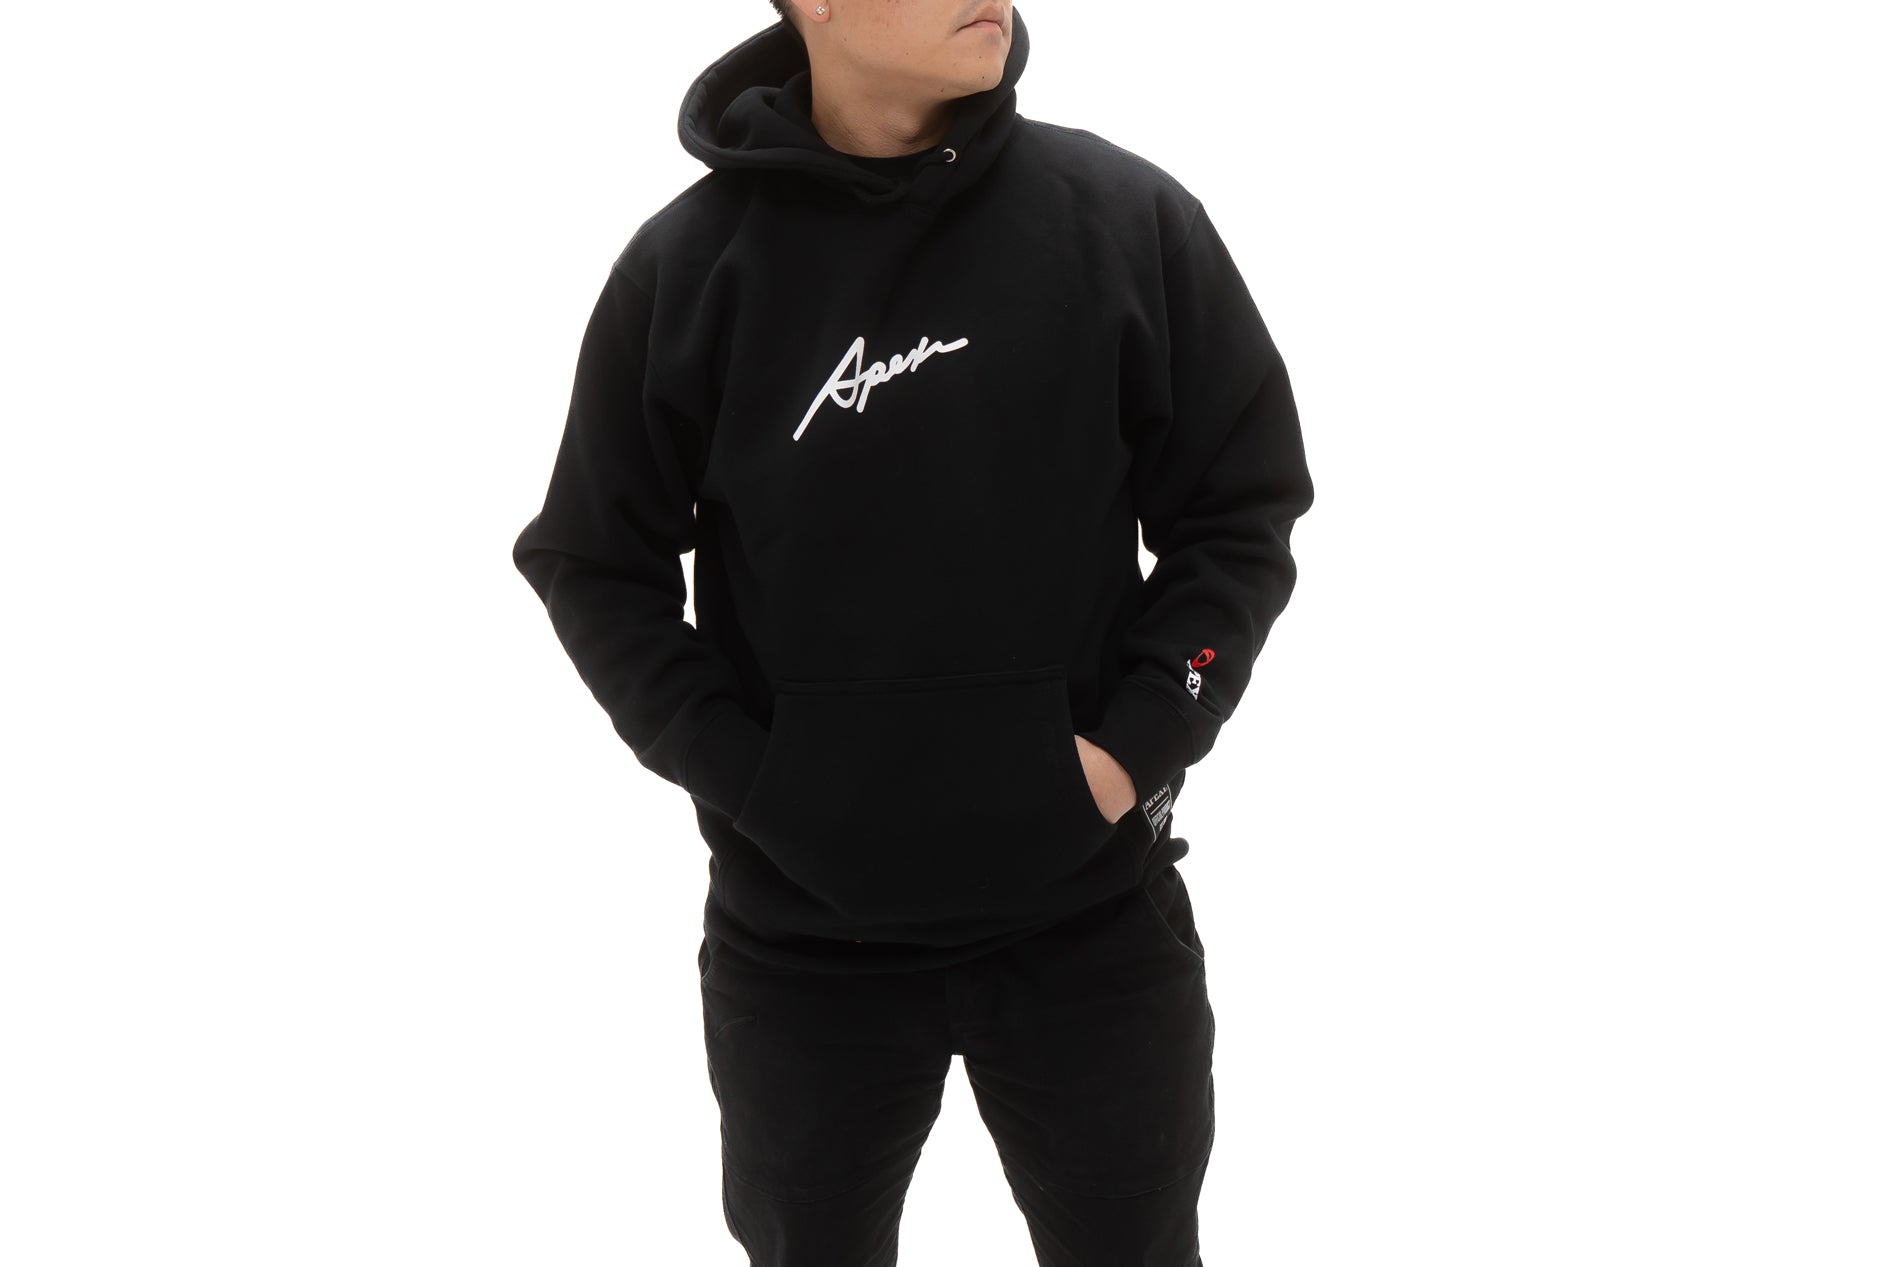 A'PEXi - A'PEXi Find Your Driving Emotion Hoodie - 0